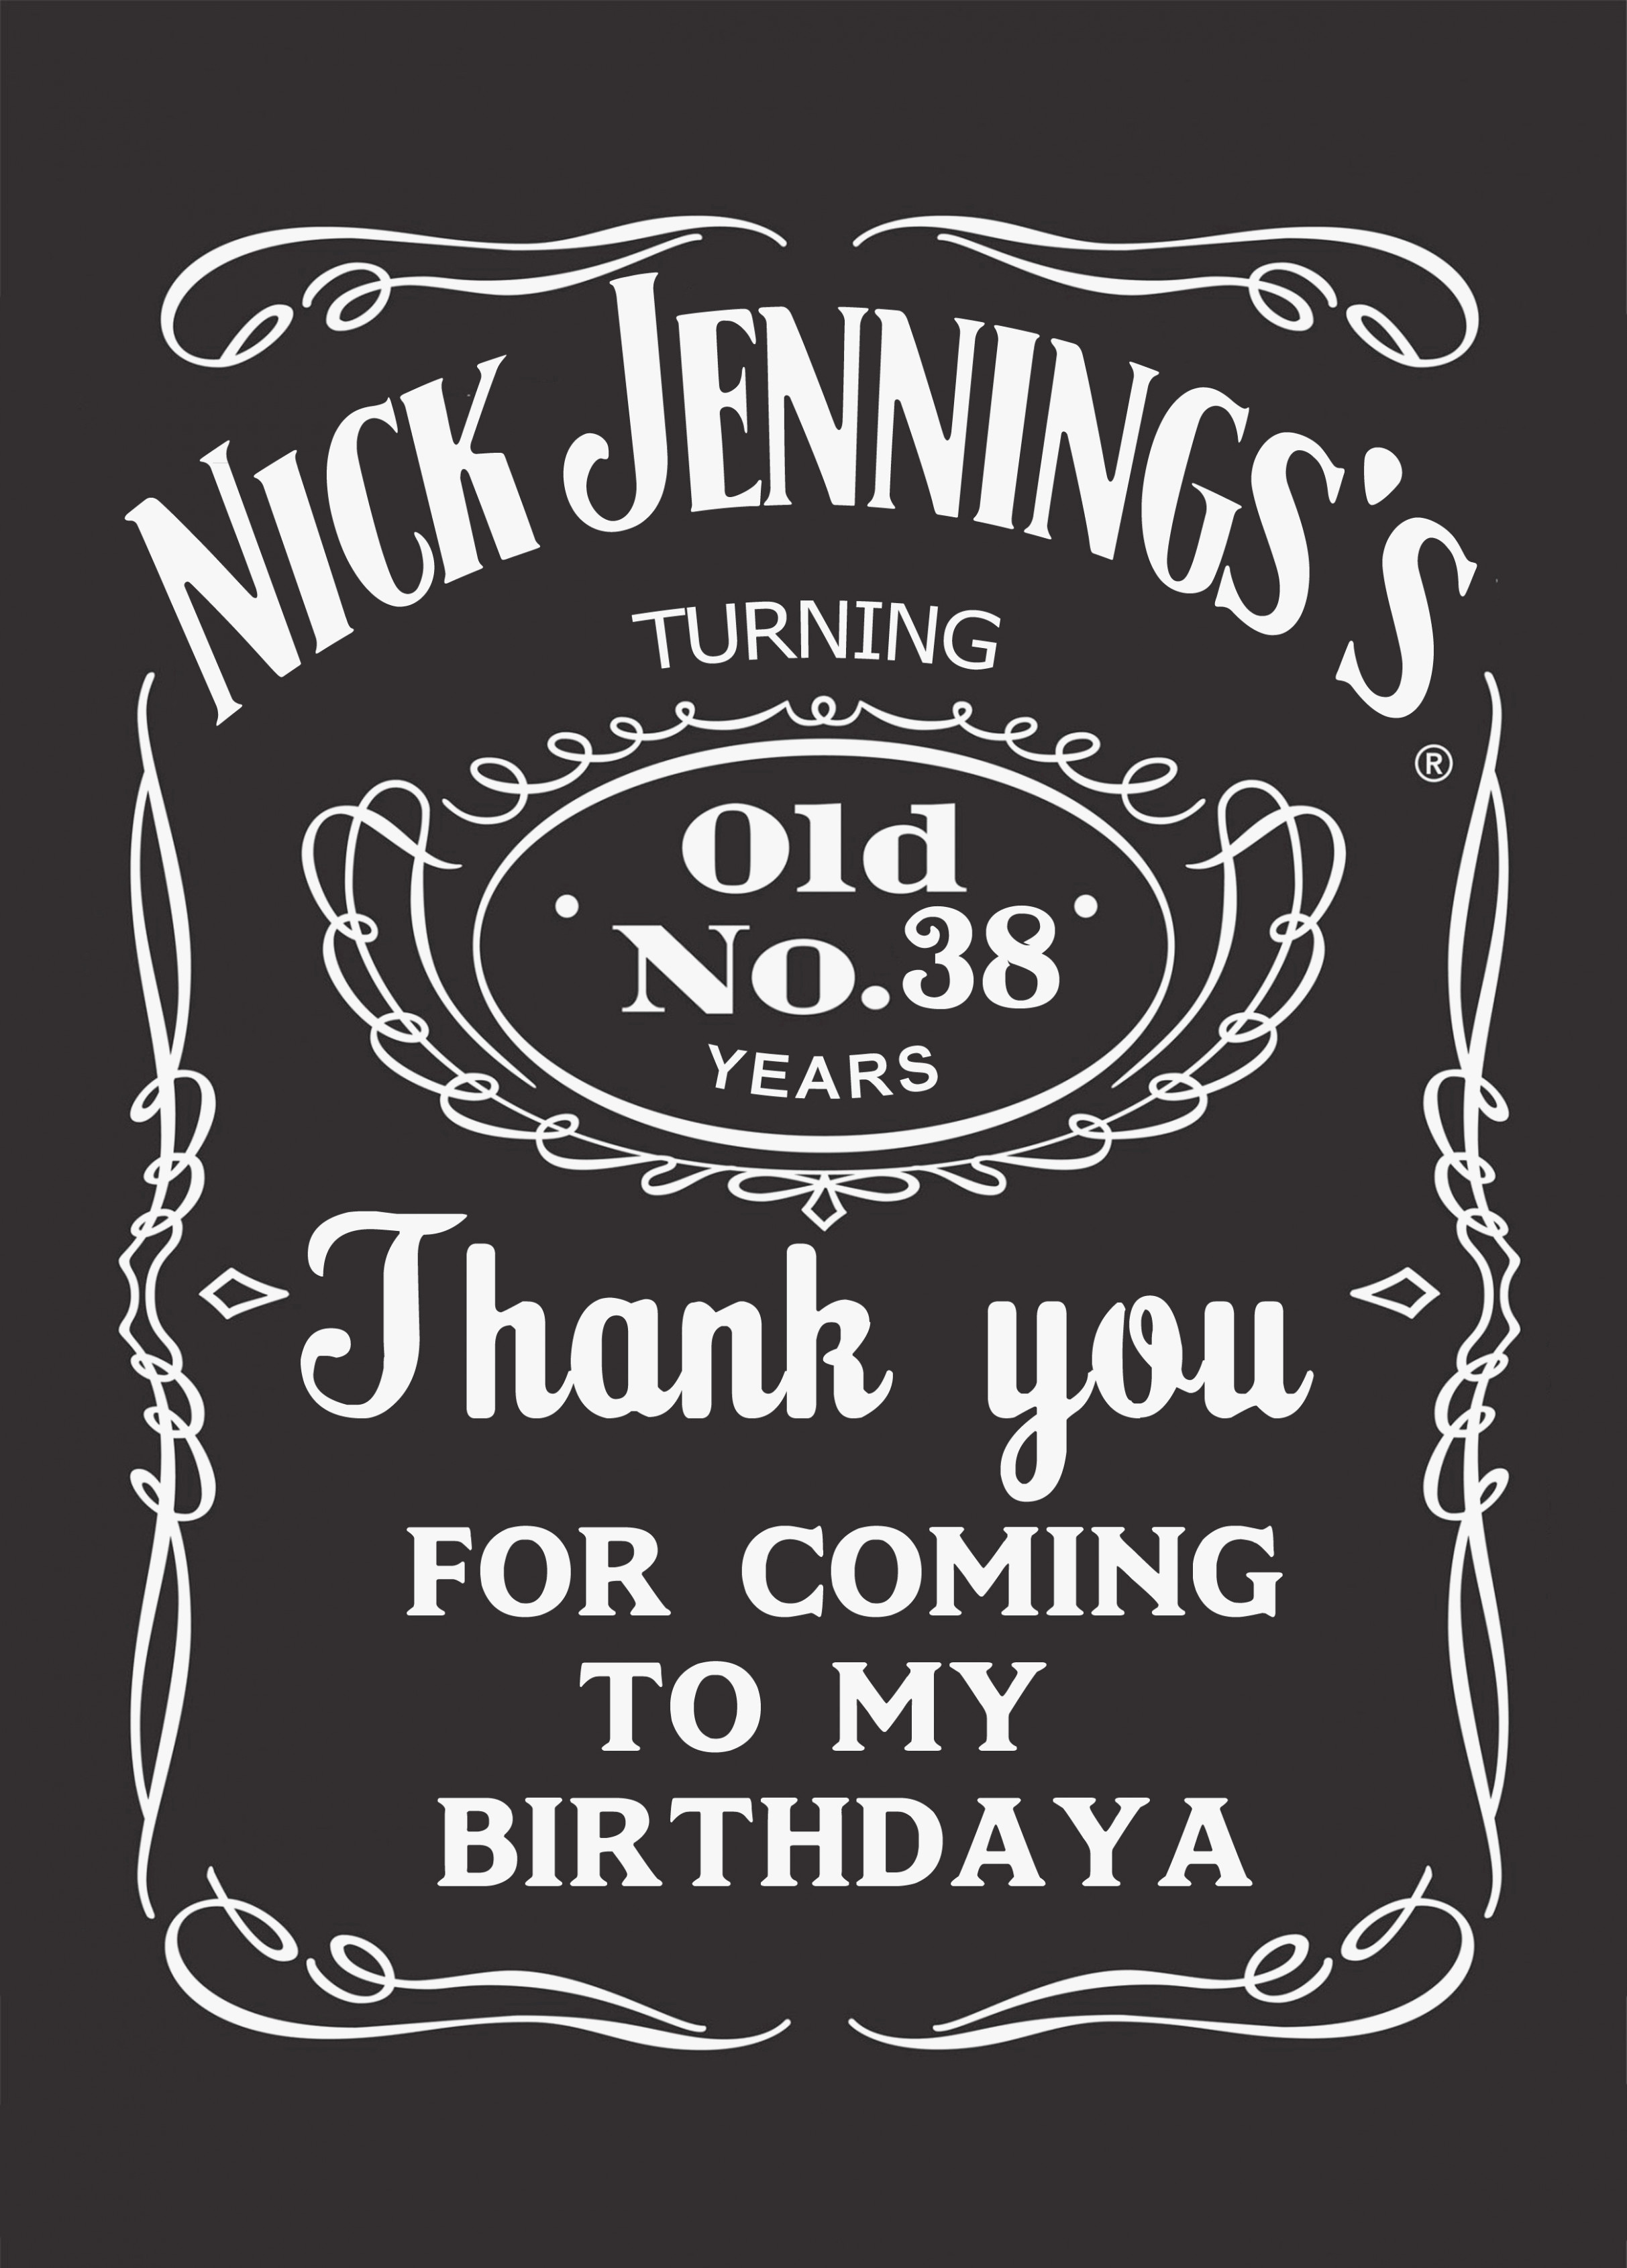 Jack Daniels Invitation Template Free Inspirational 10 Ideas to organize Your Own Customize